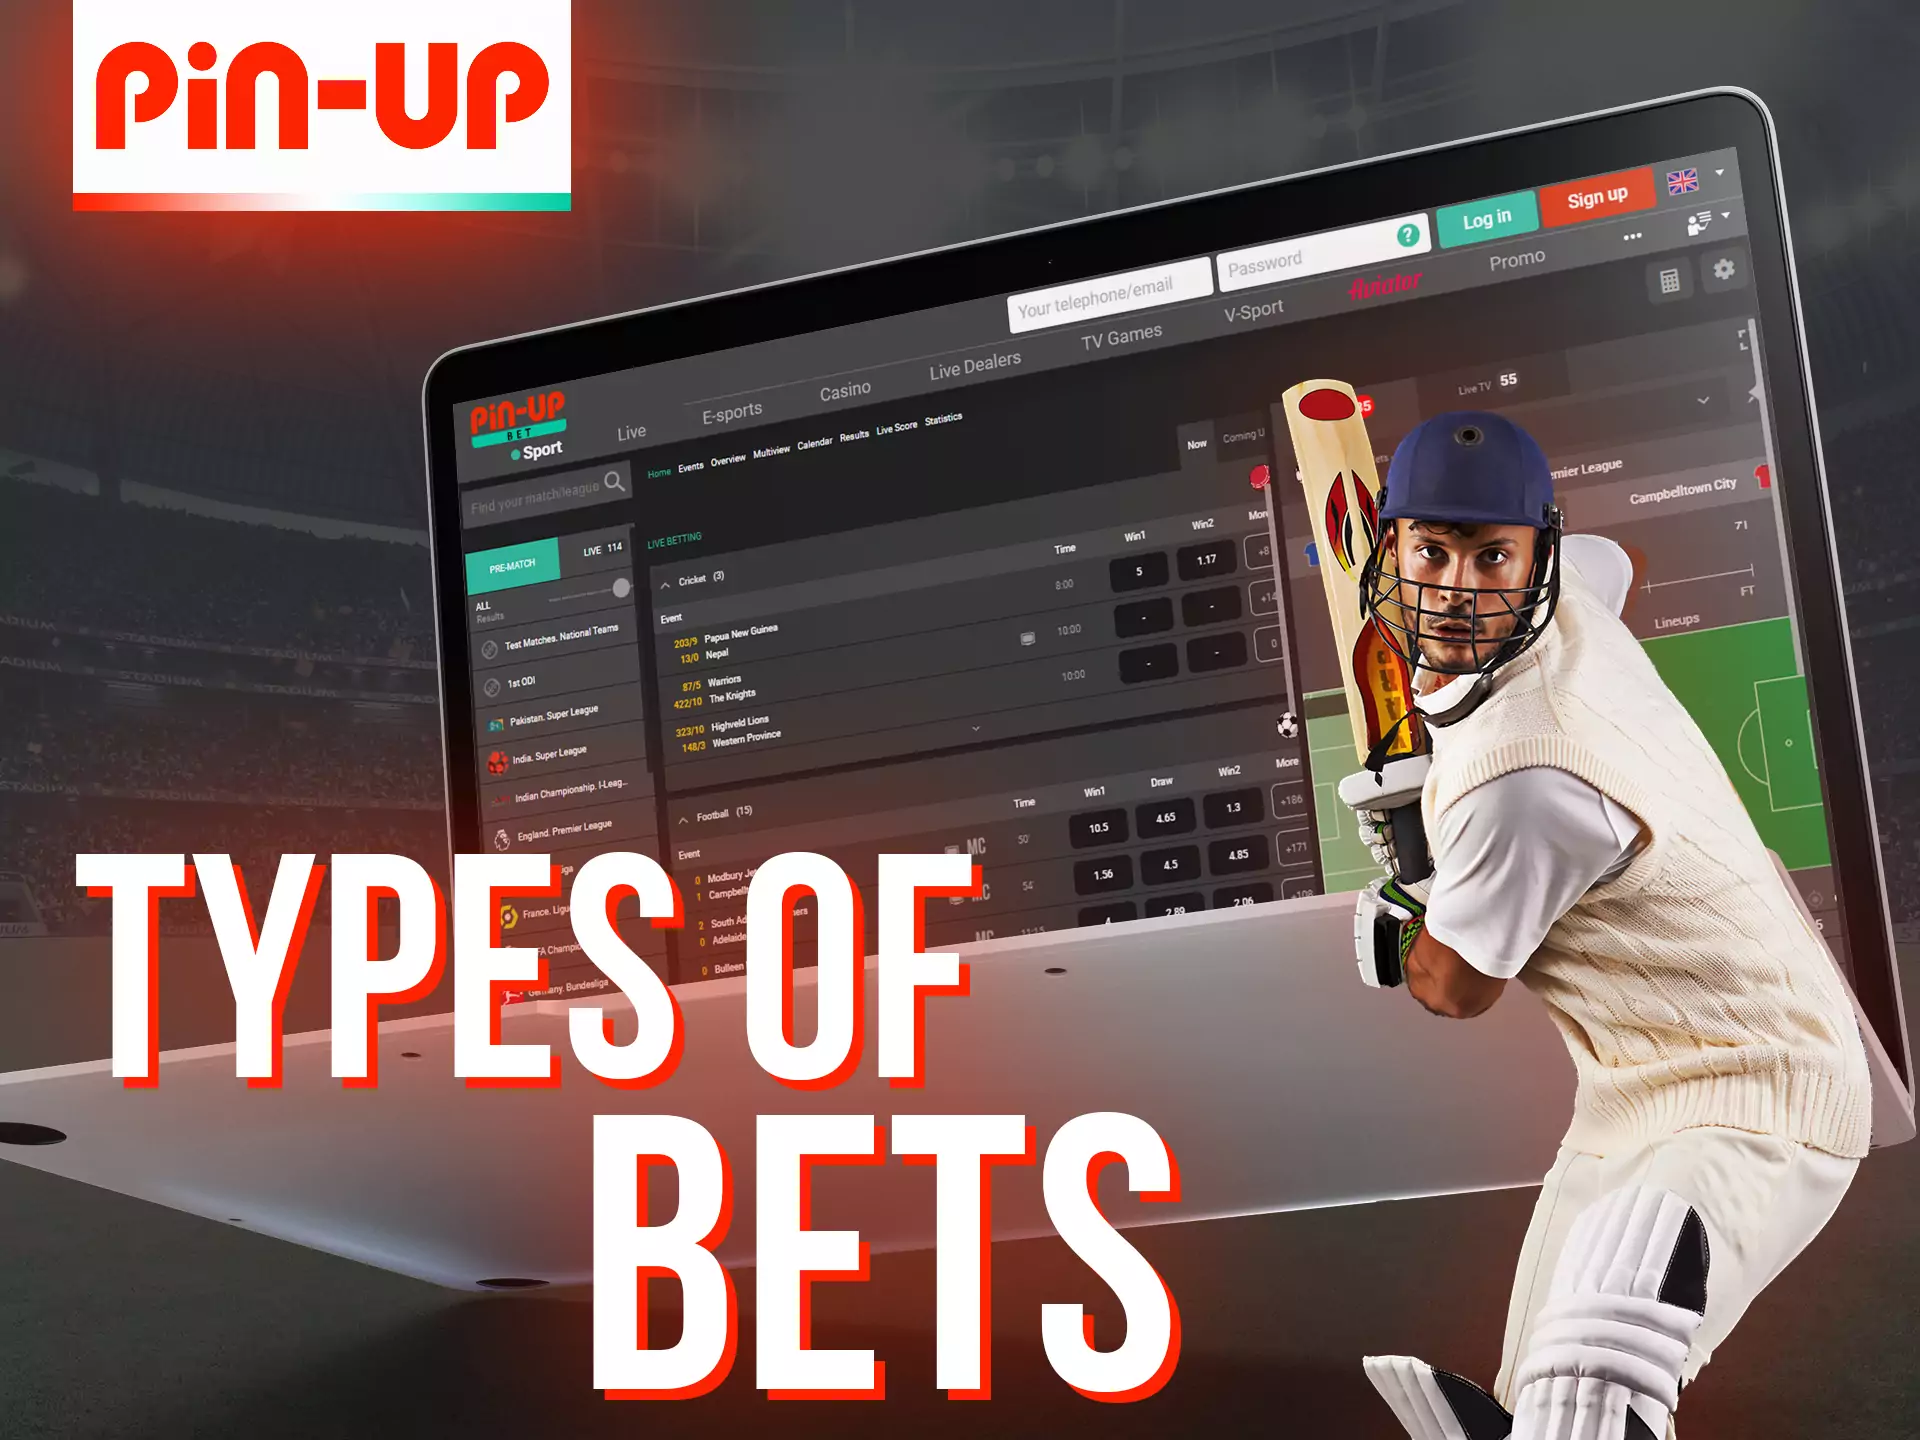 At Pin-up, try different types of bets and find the most comfortable one.